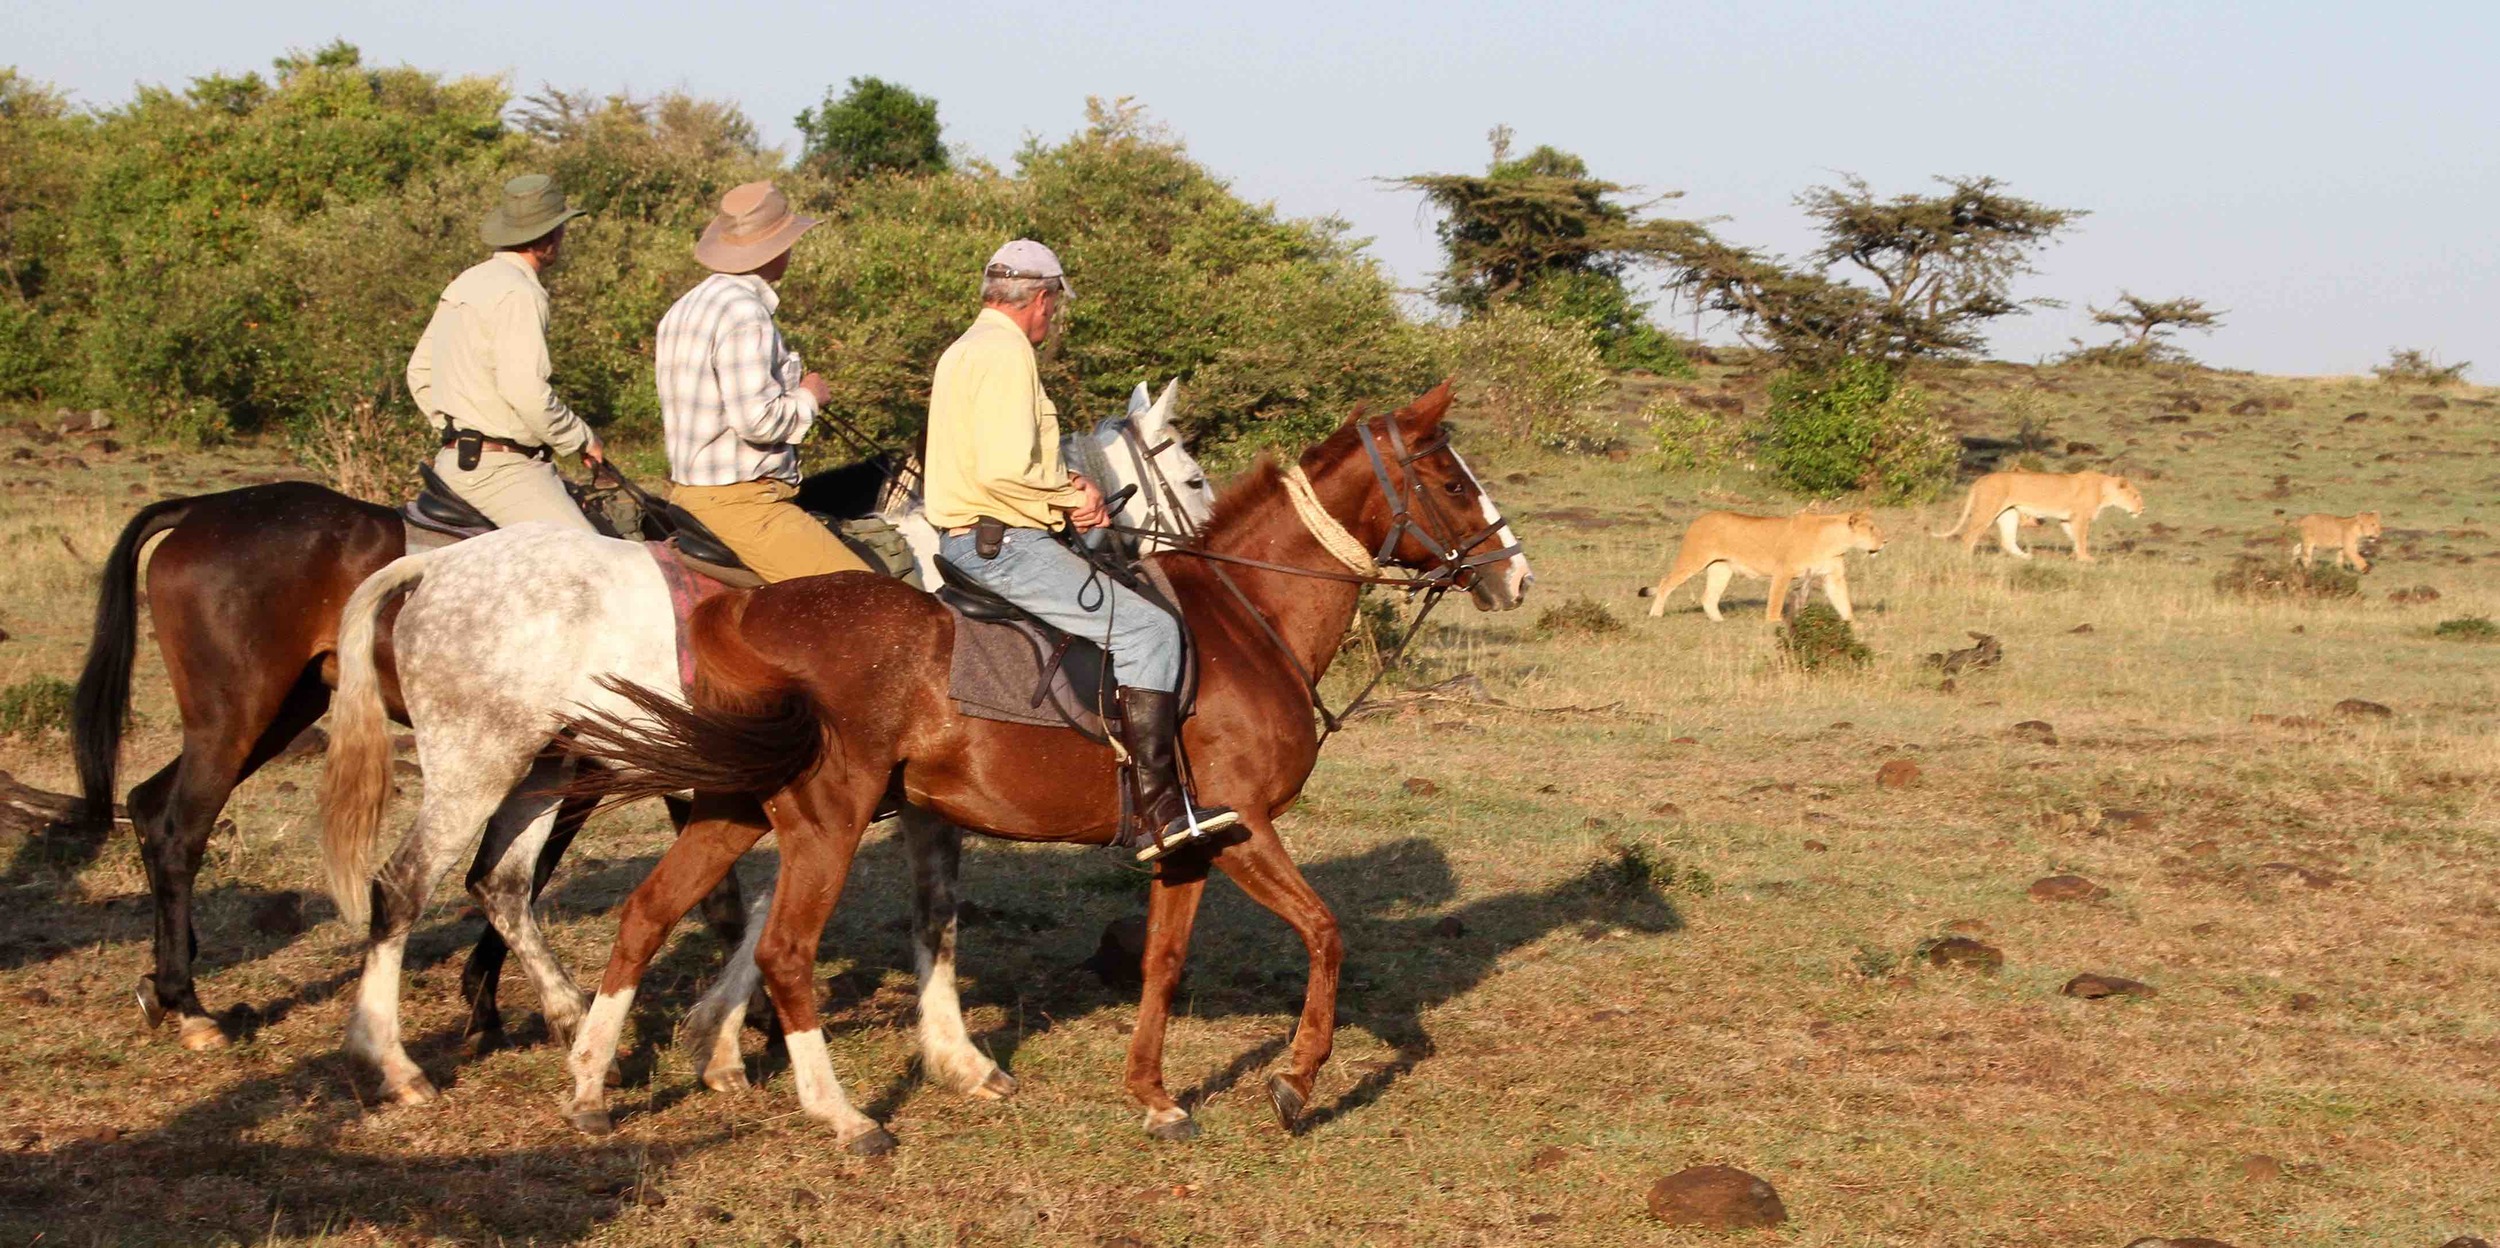   Mobile Riding Safaris   ...extraordinary encounters with big cats 